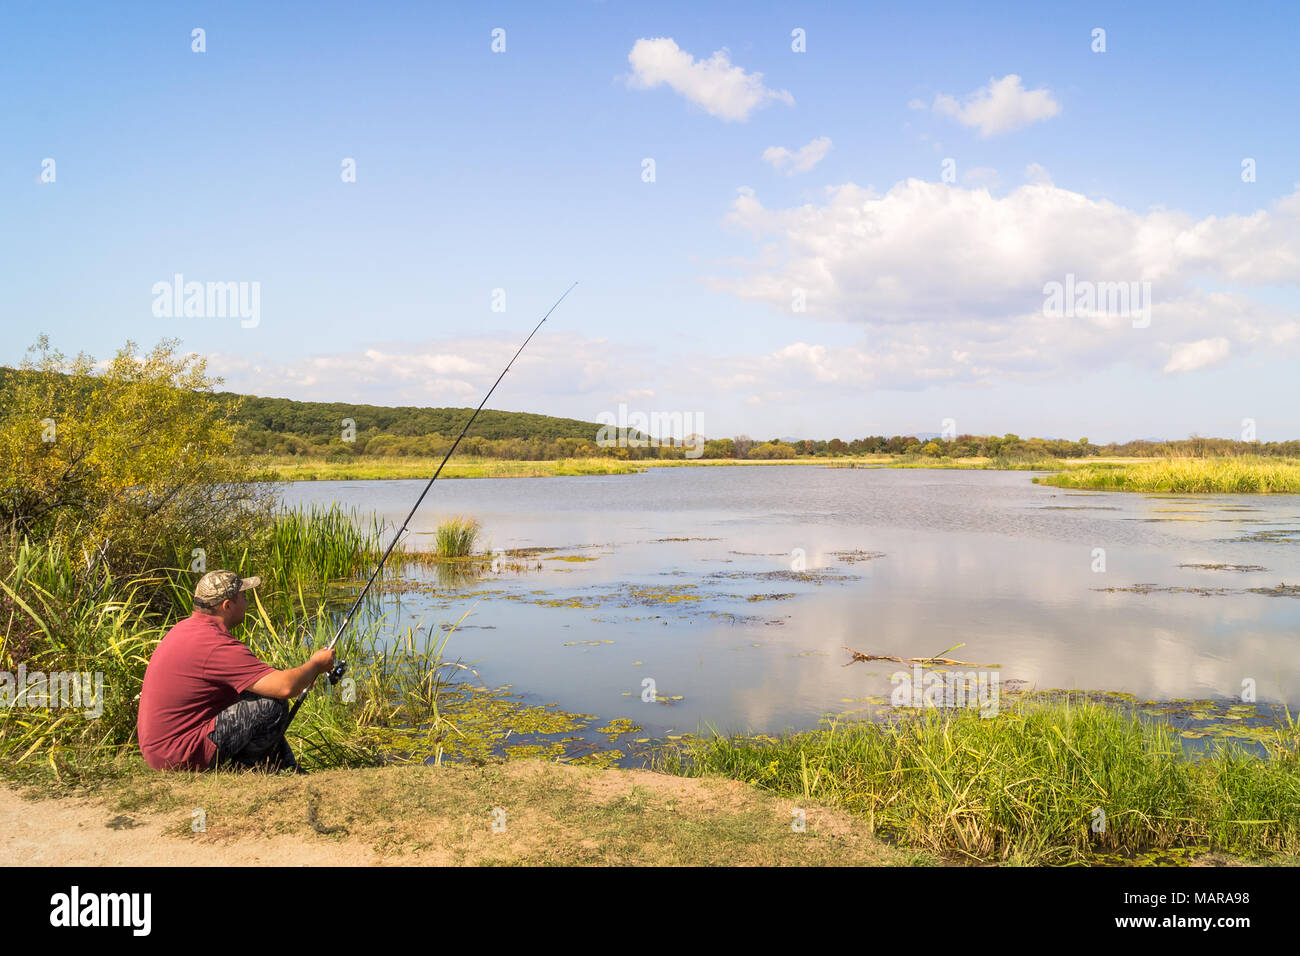 https://c8.alamy.com/comp/MARA98/fisherman-on-the-shore-of-the-lake-fishing-adventure-against-the-backdrop-of-the-scenic-landscape-of-lake-khanka-in-the-far-east-of-russia-MARA98.jpg